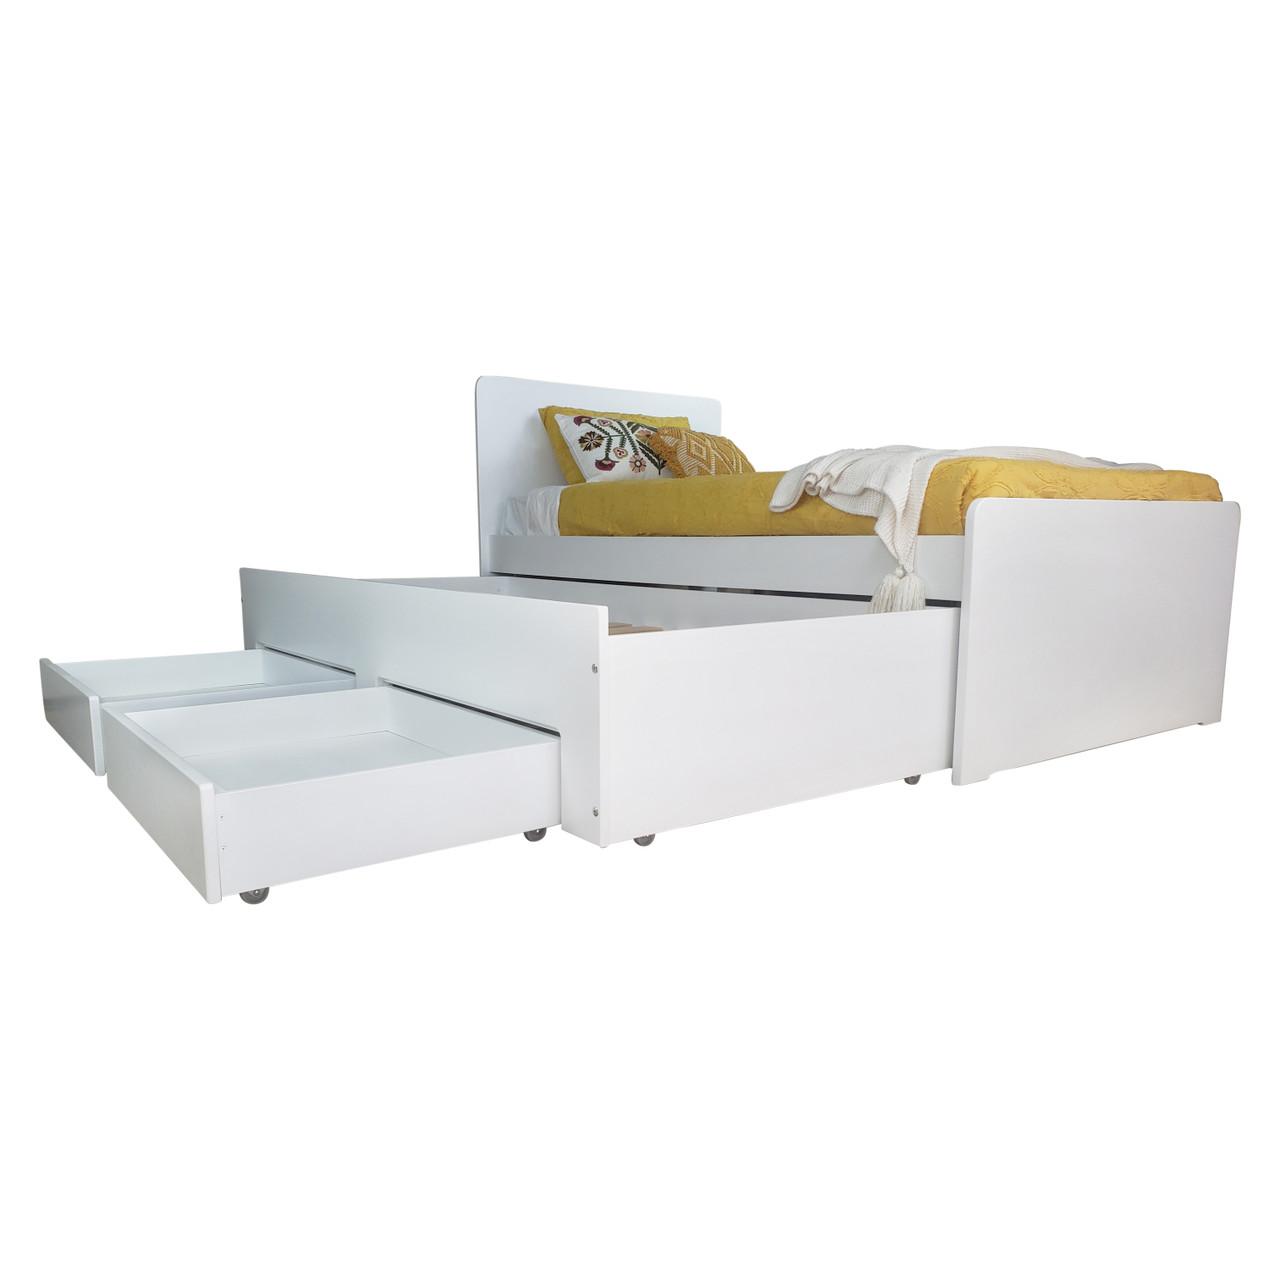 The Quokka King Single bed with single trundle bed and 2 x drawers Australian Furniture Makers Pty Ltd Ballarat 0449 048 686